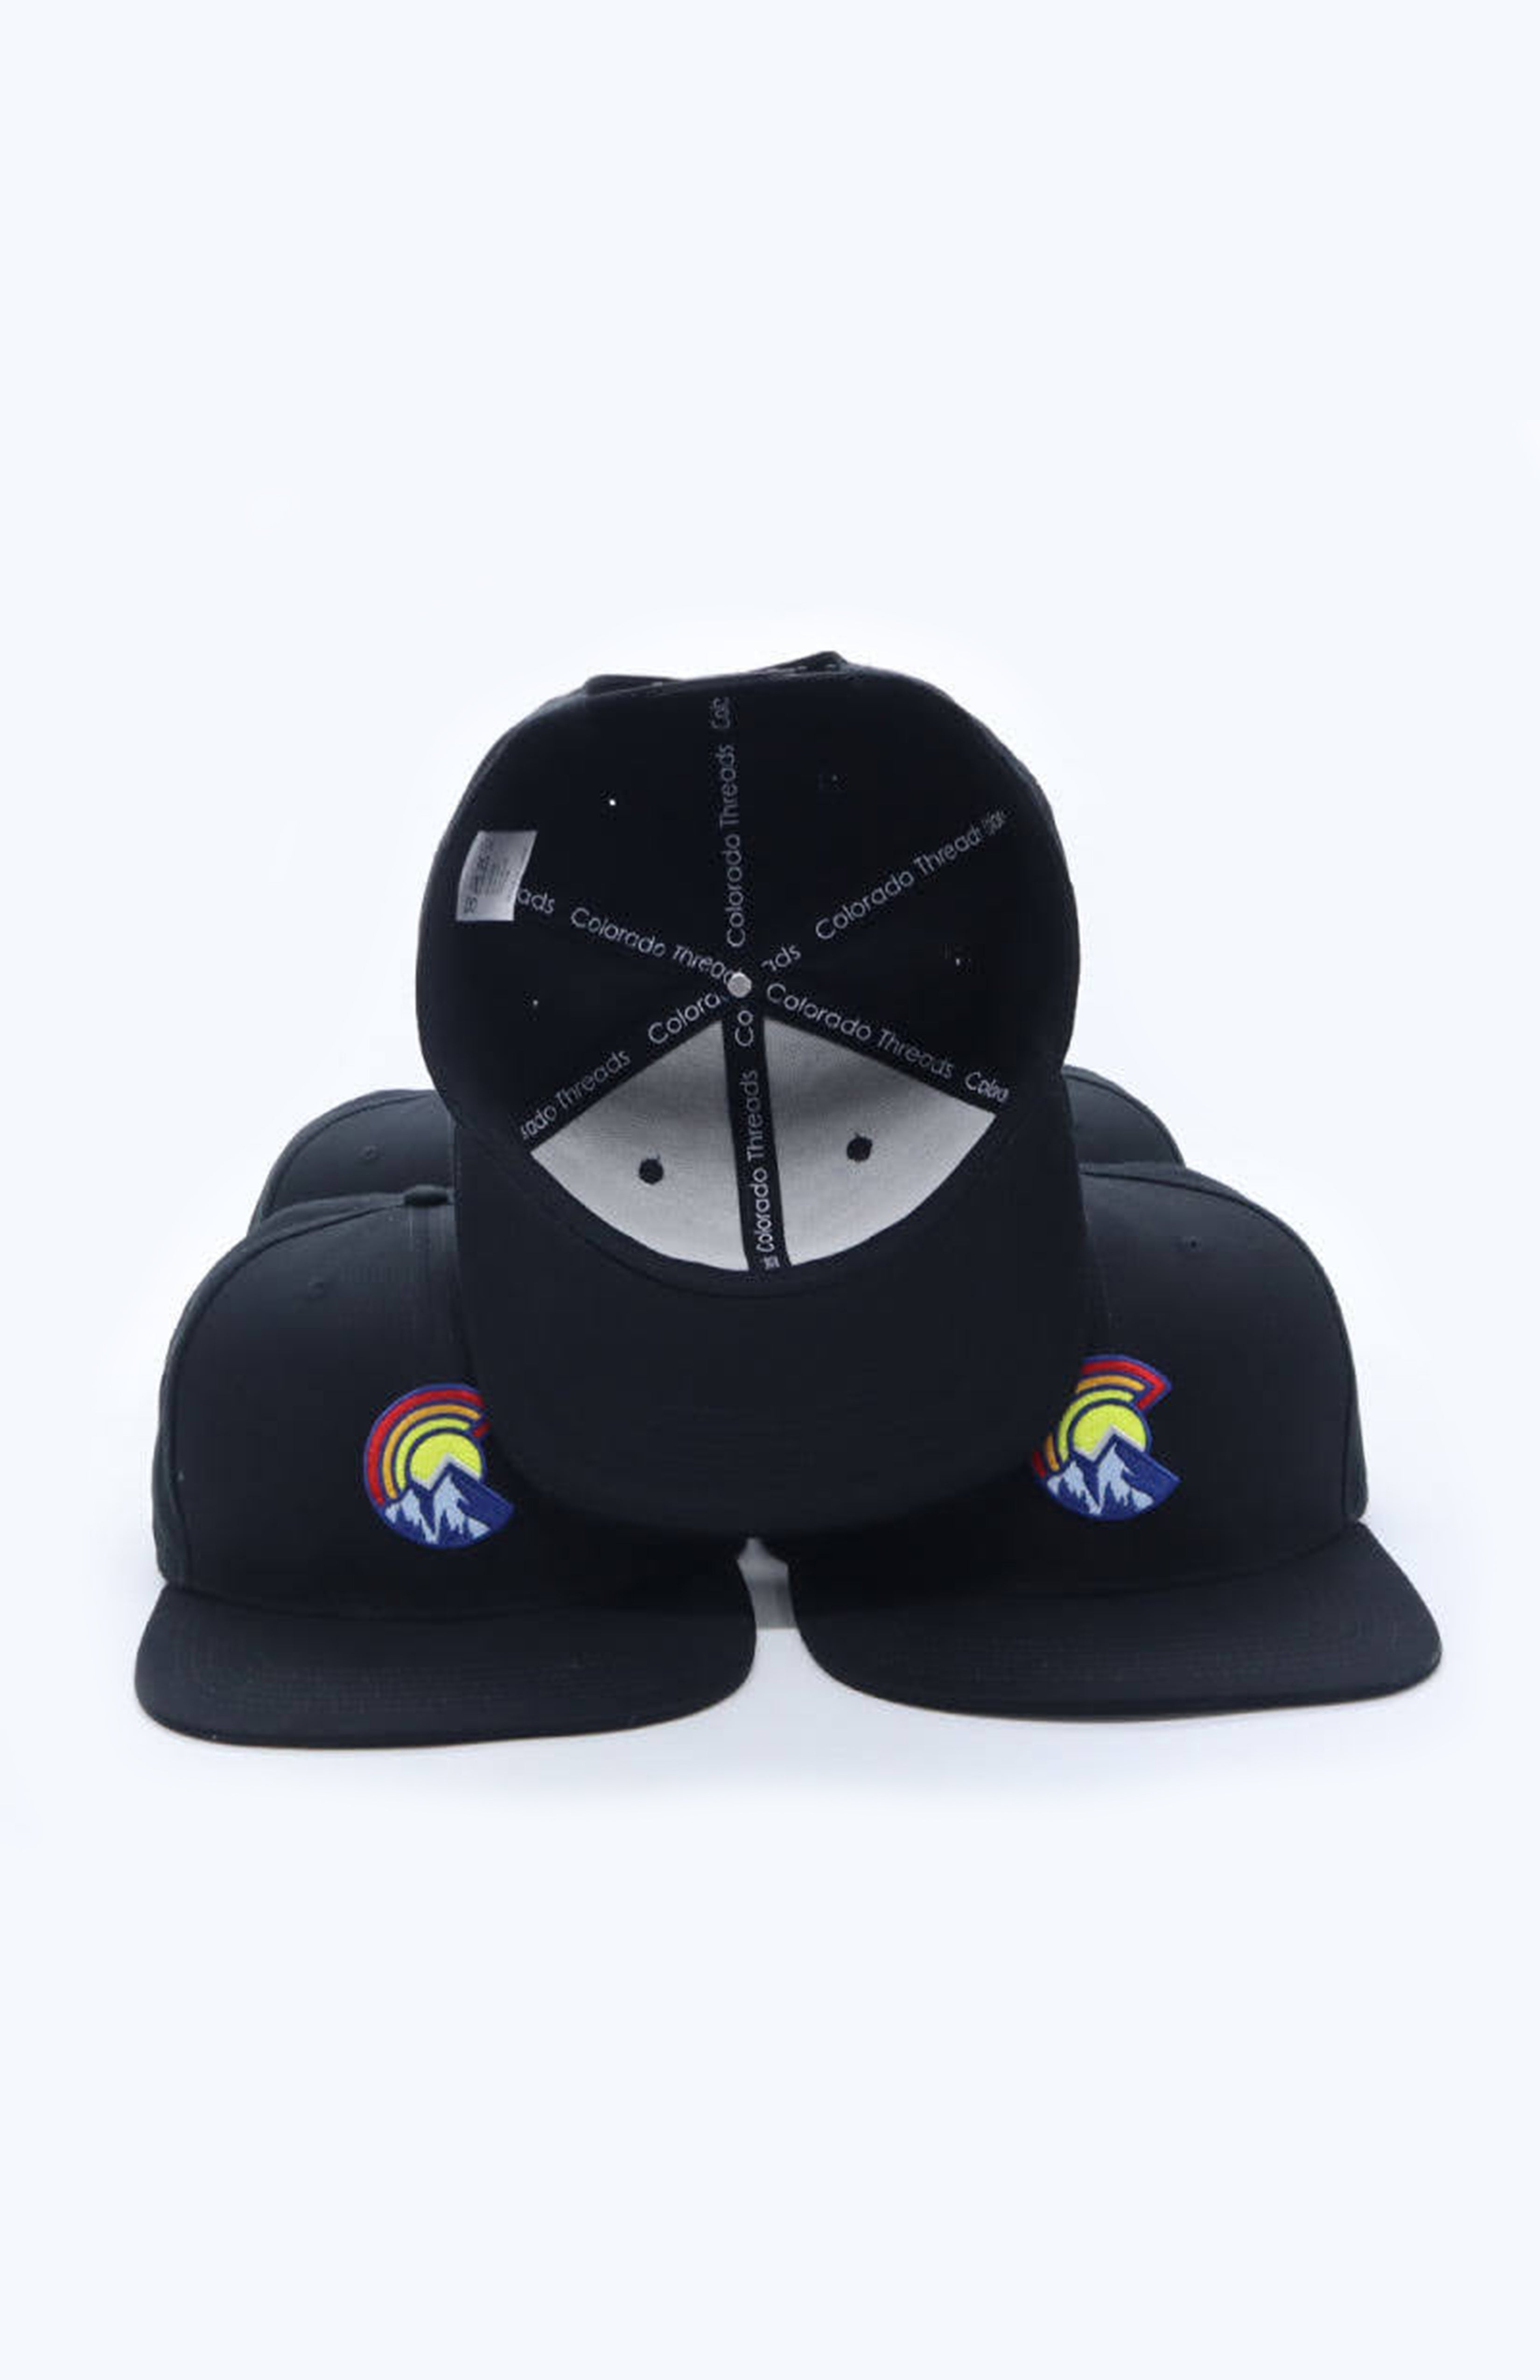 Colorful C Mountain Hat Black Colorway Colorado Threads Clothing